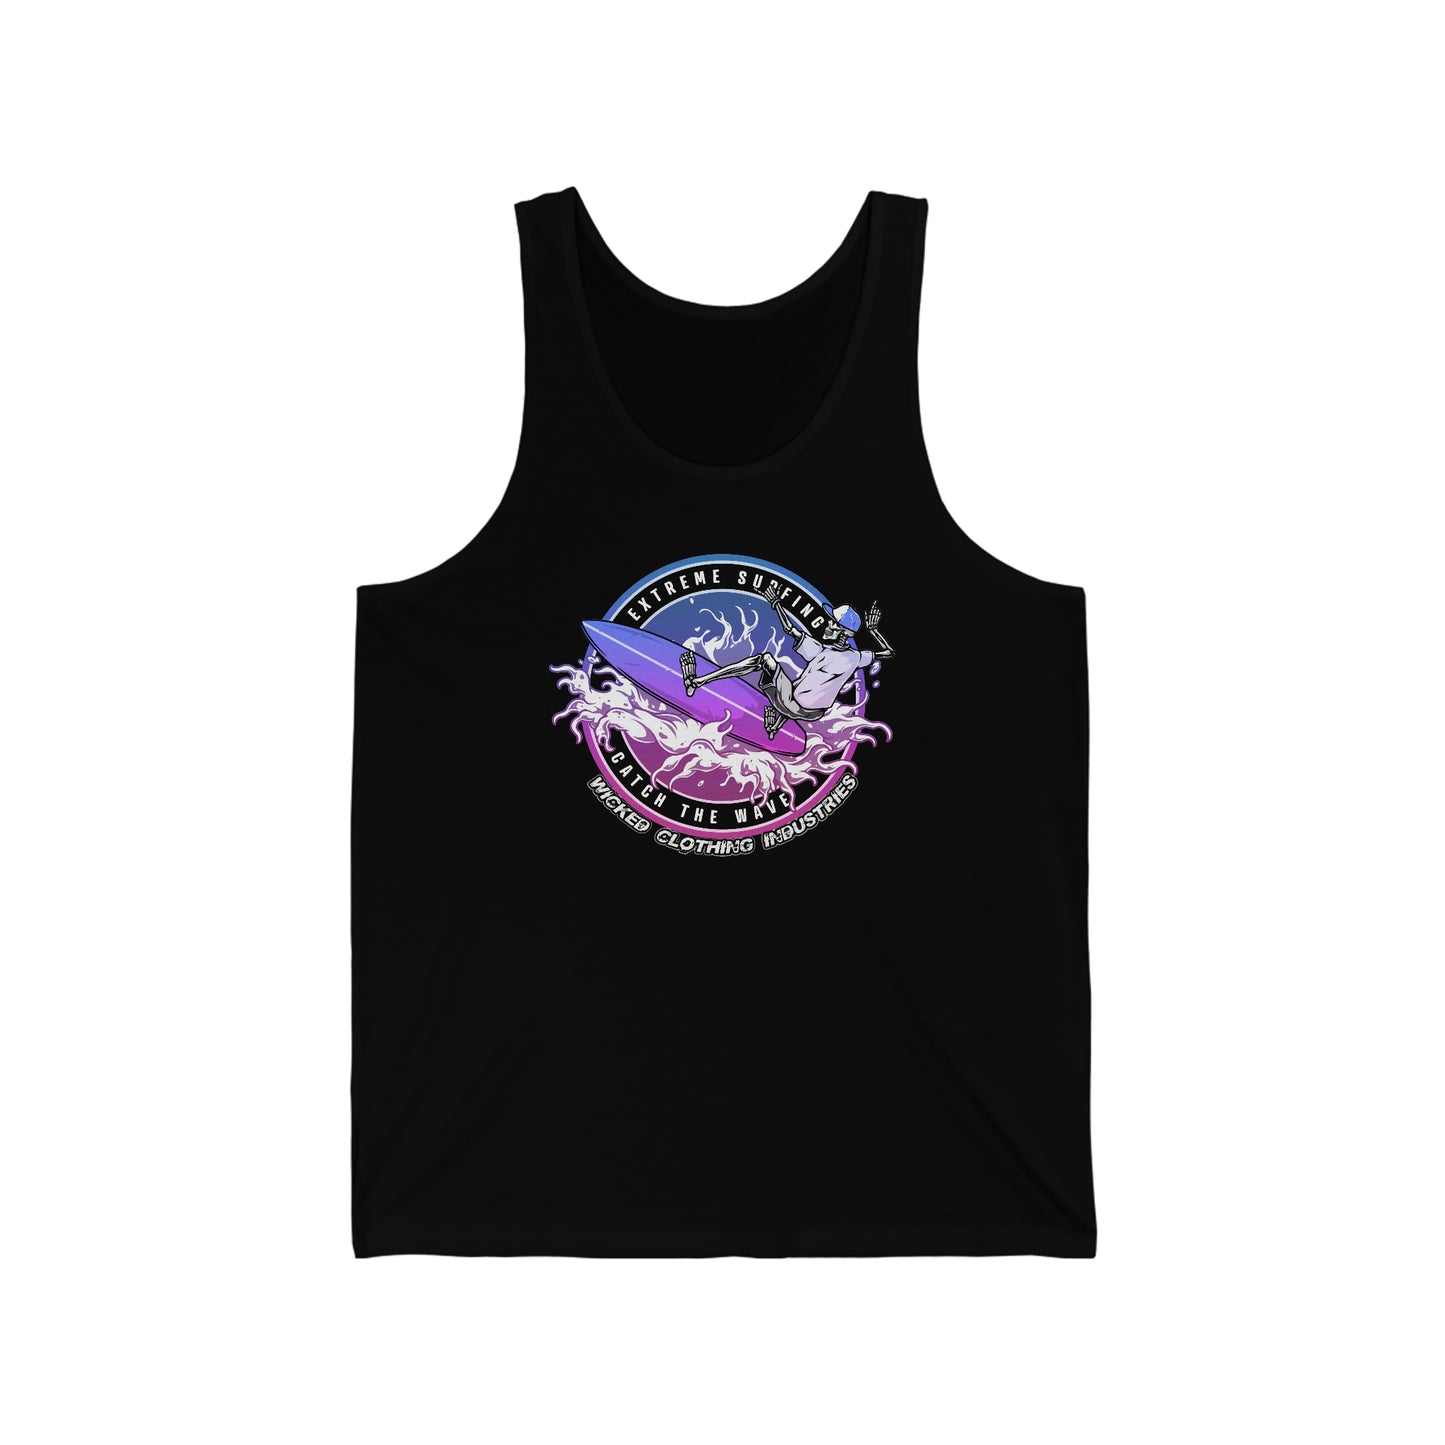 Wicked Surf Tank Top